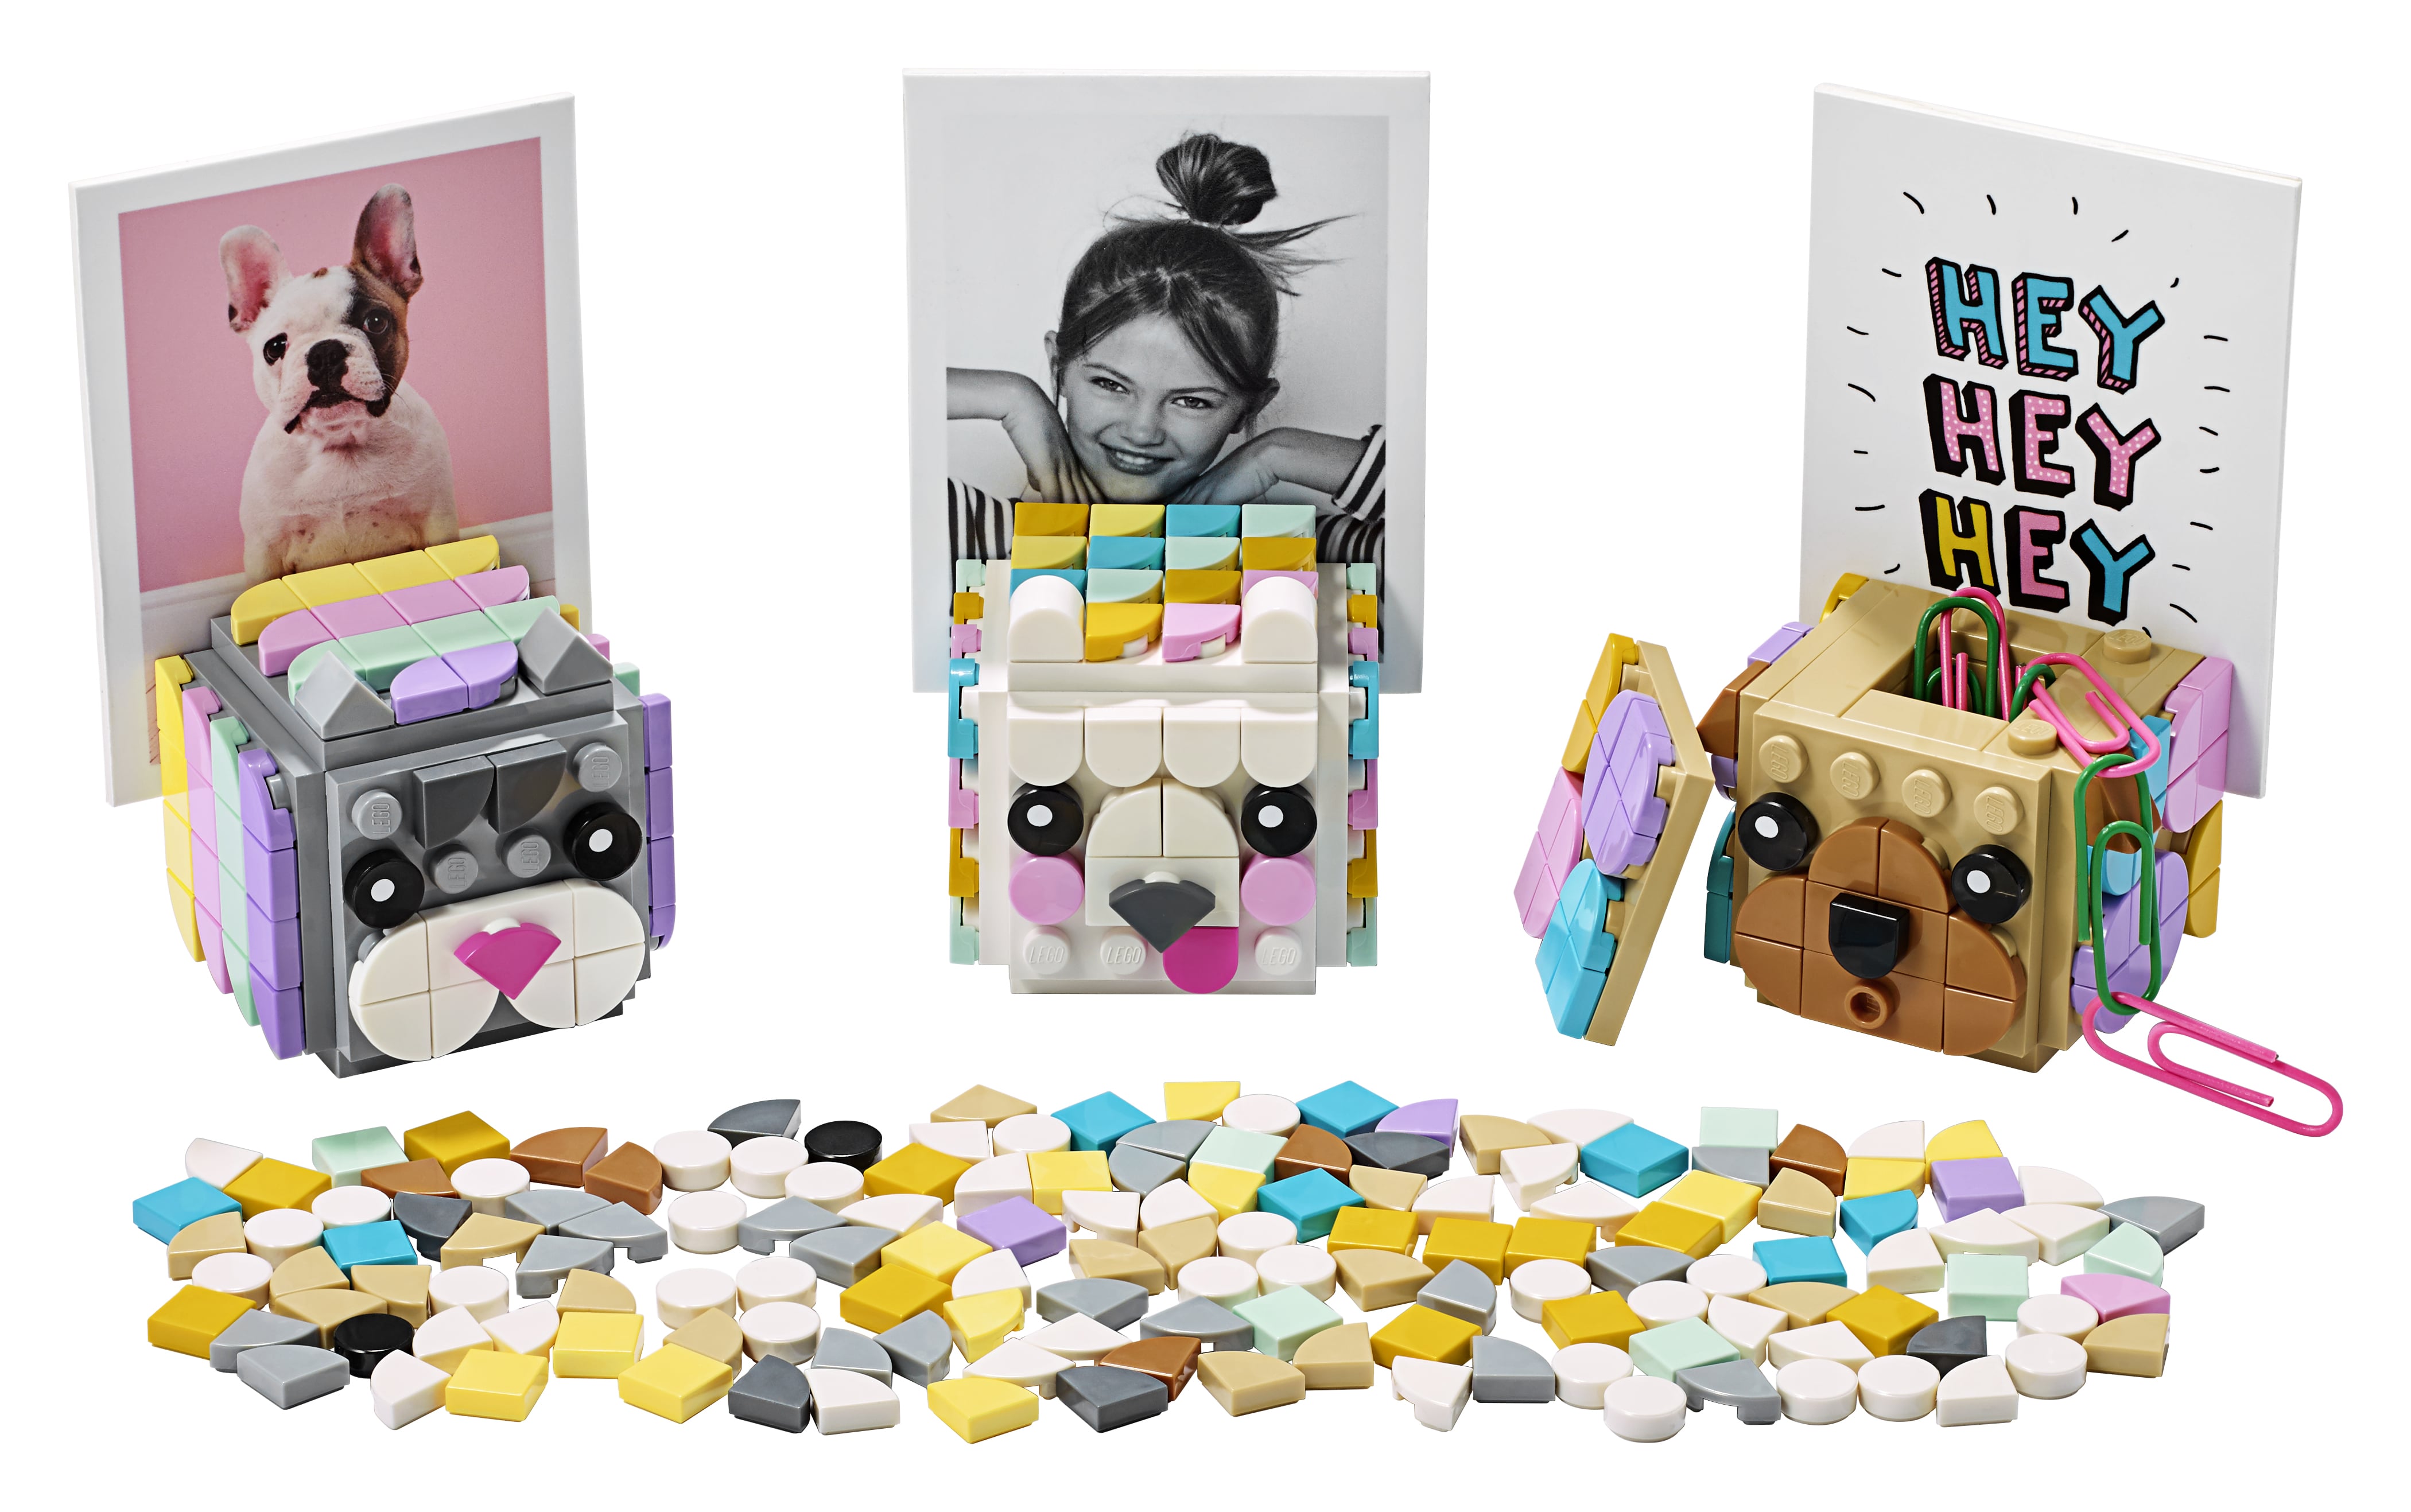 What Is Lego's New Product Lego Dots?